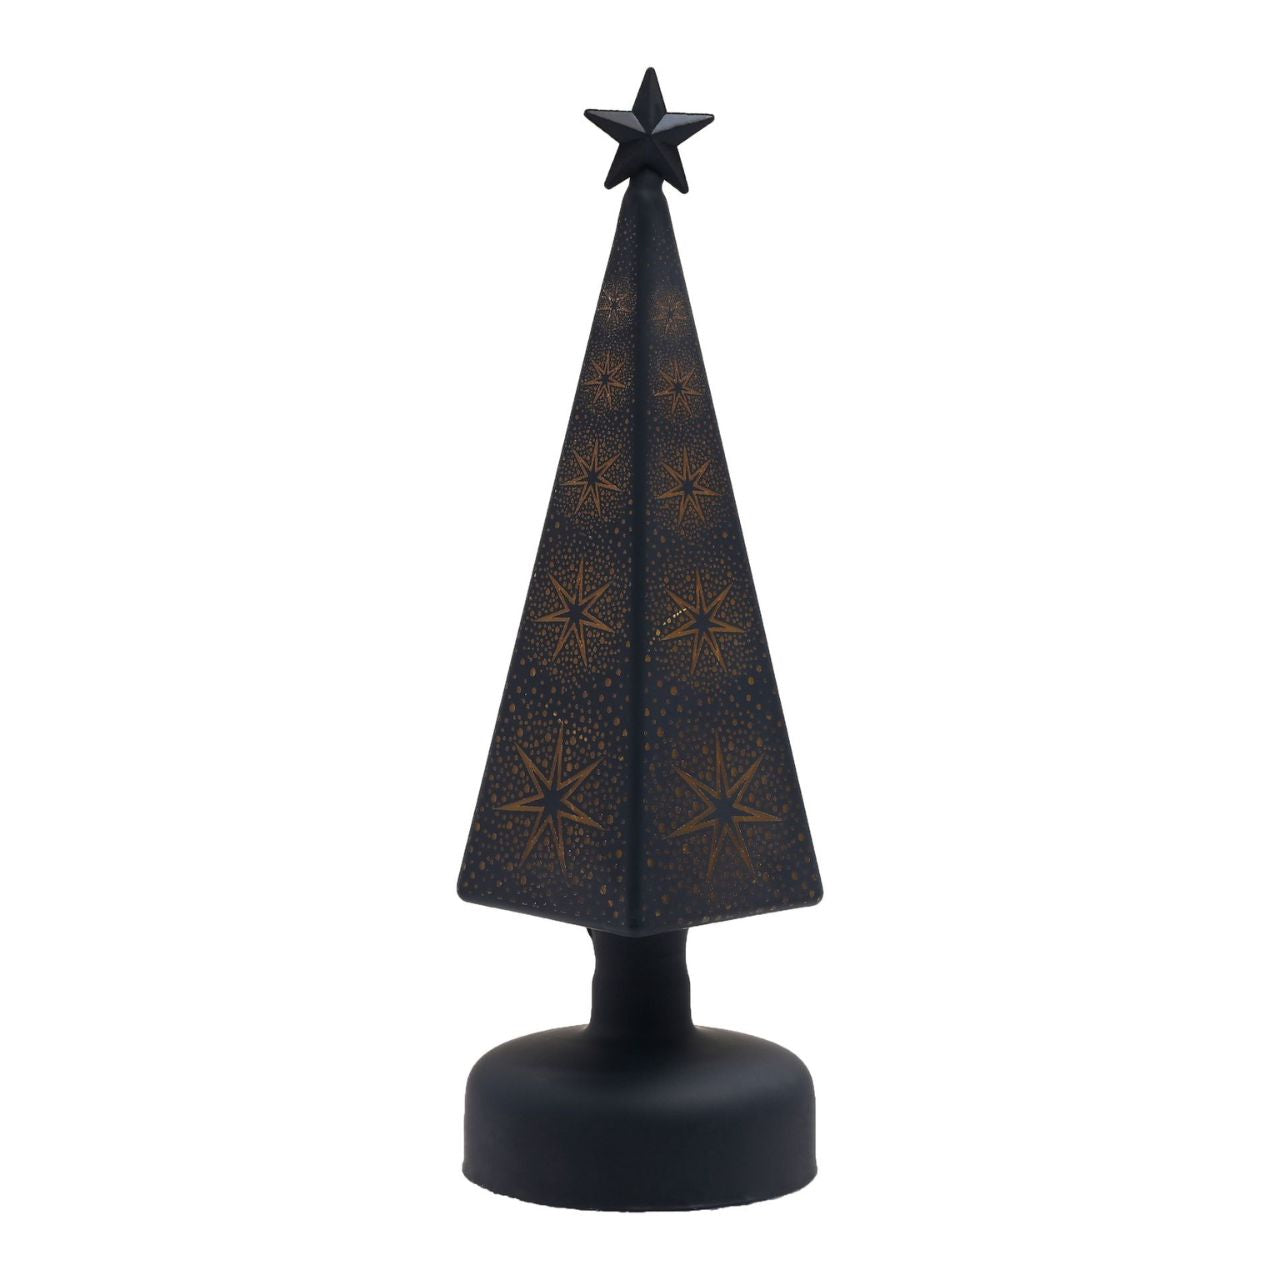 Celestial Blue Christmas LED Tree Light Decoration  A celestial blue LED tree light decoration by THE SEASONAL GIFT CO®.  This celestial decoration takes inspiration from the stars as it shines brightly for all to admire.